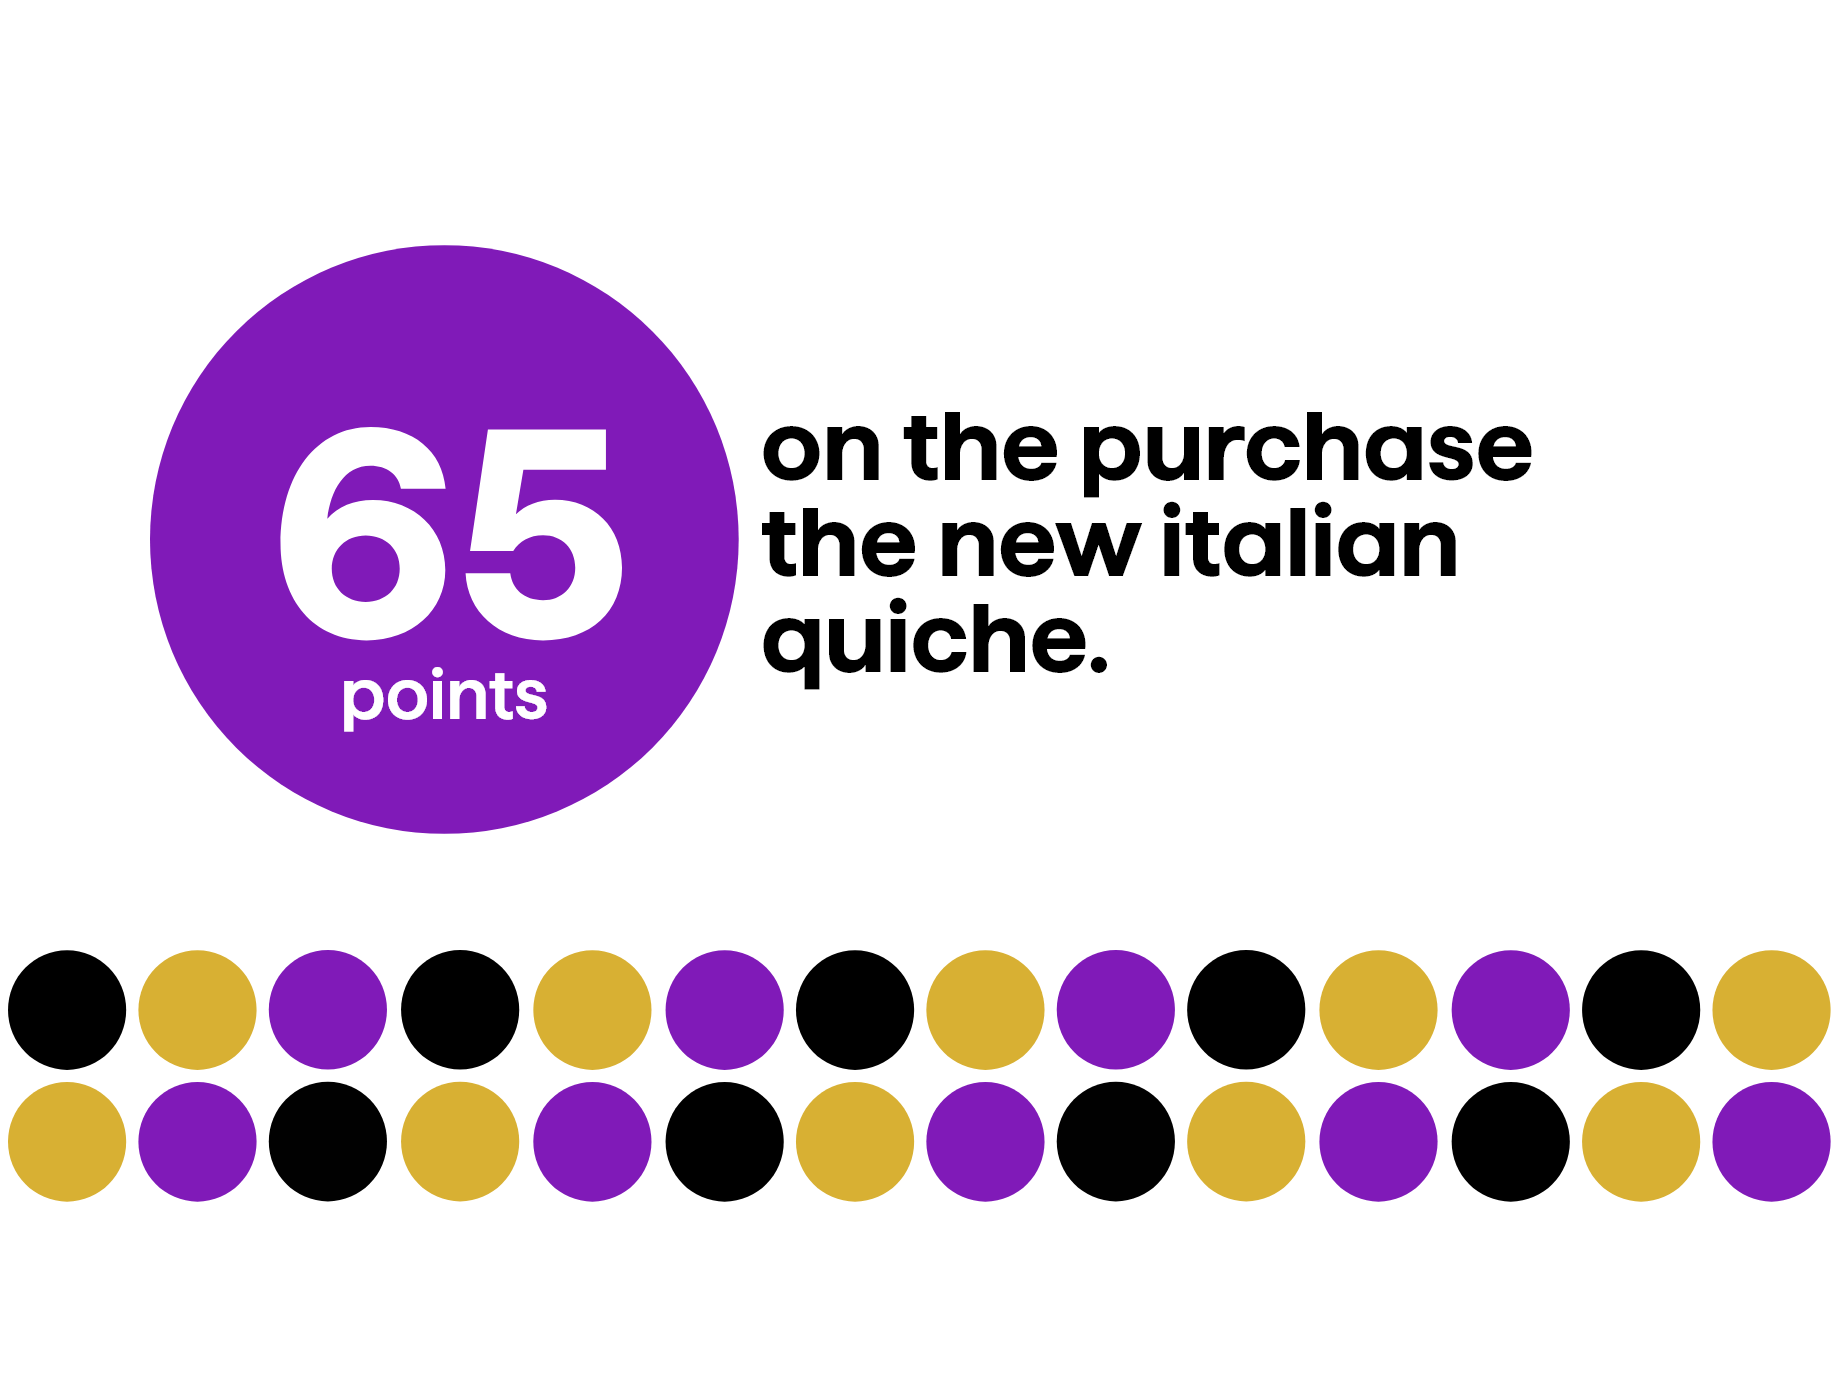 65 points on the purchase the new italian quiche.